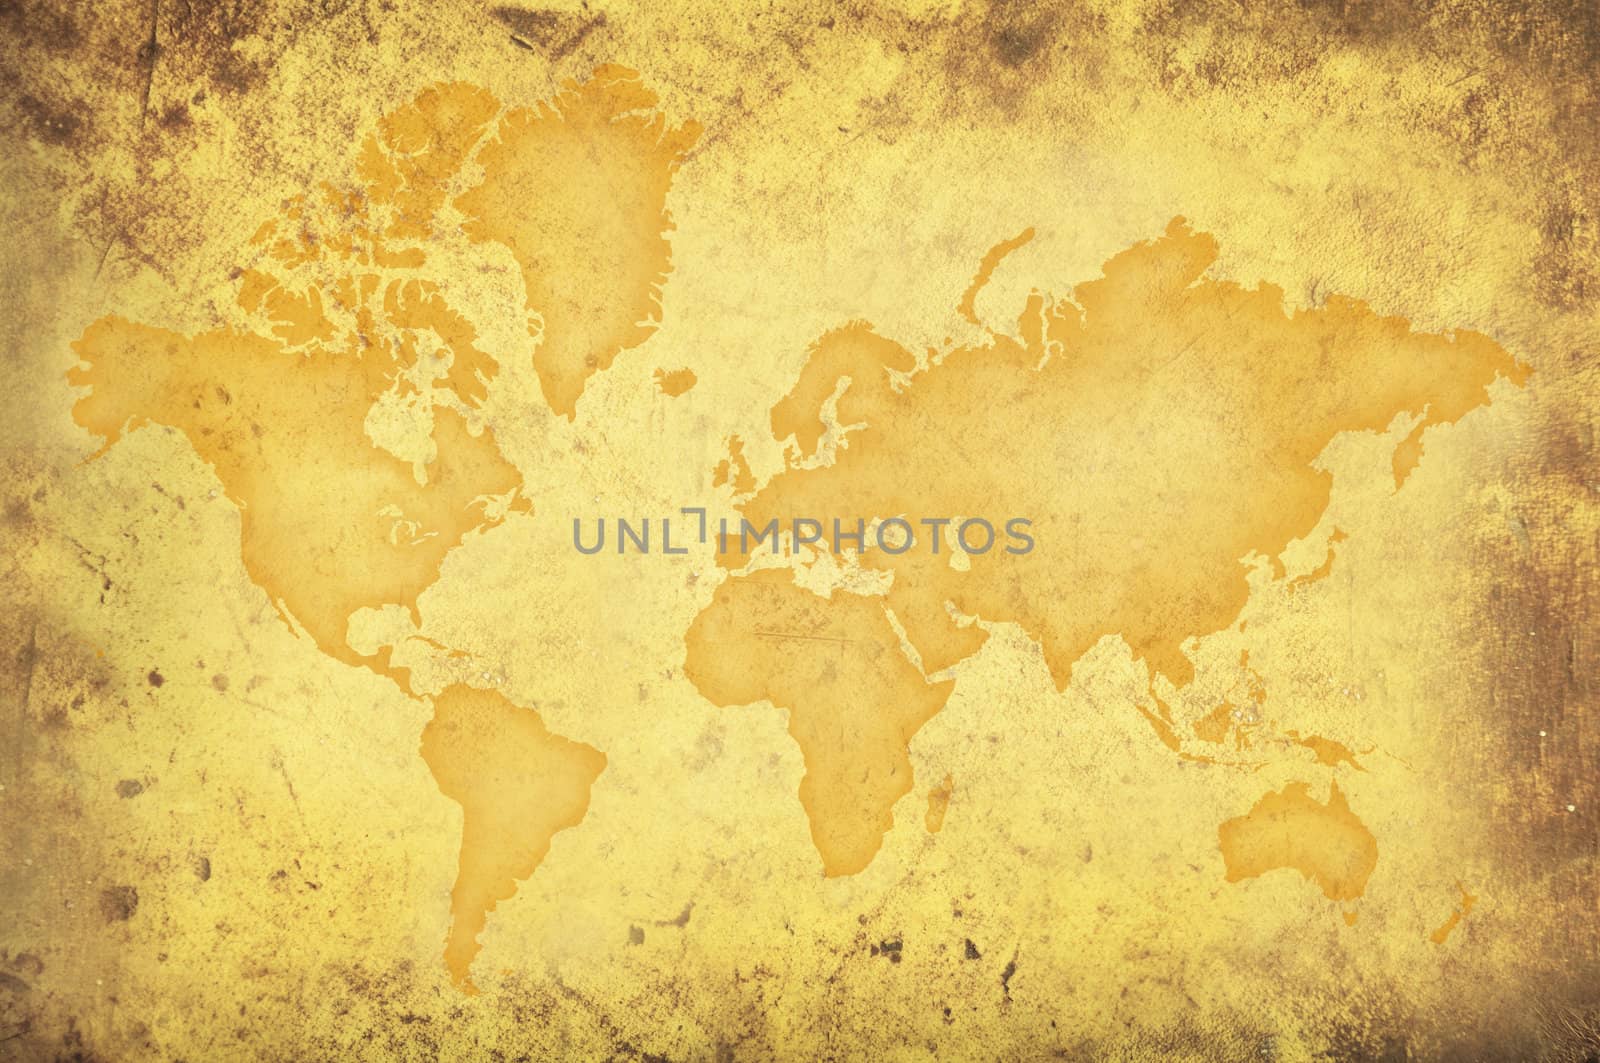 Grungy yellow map of the world by Balefire9